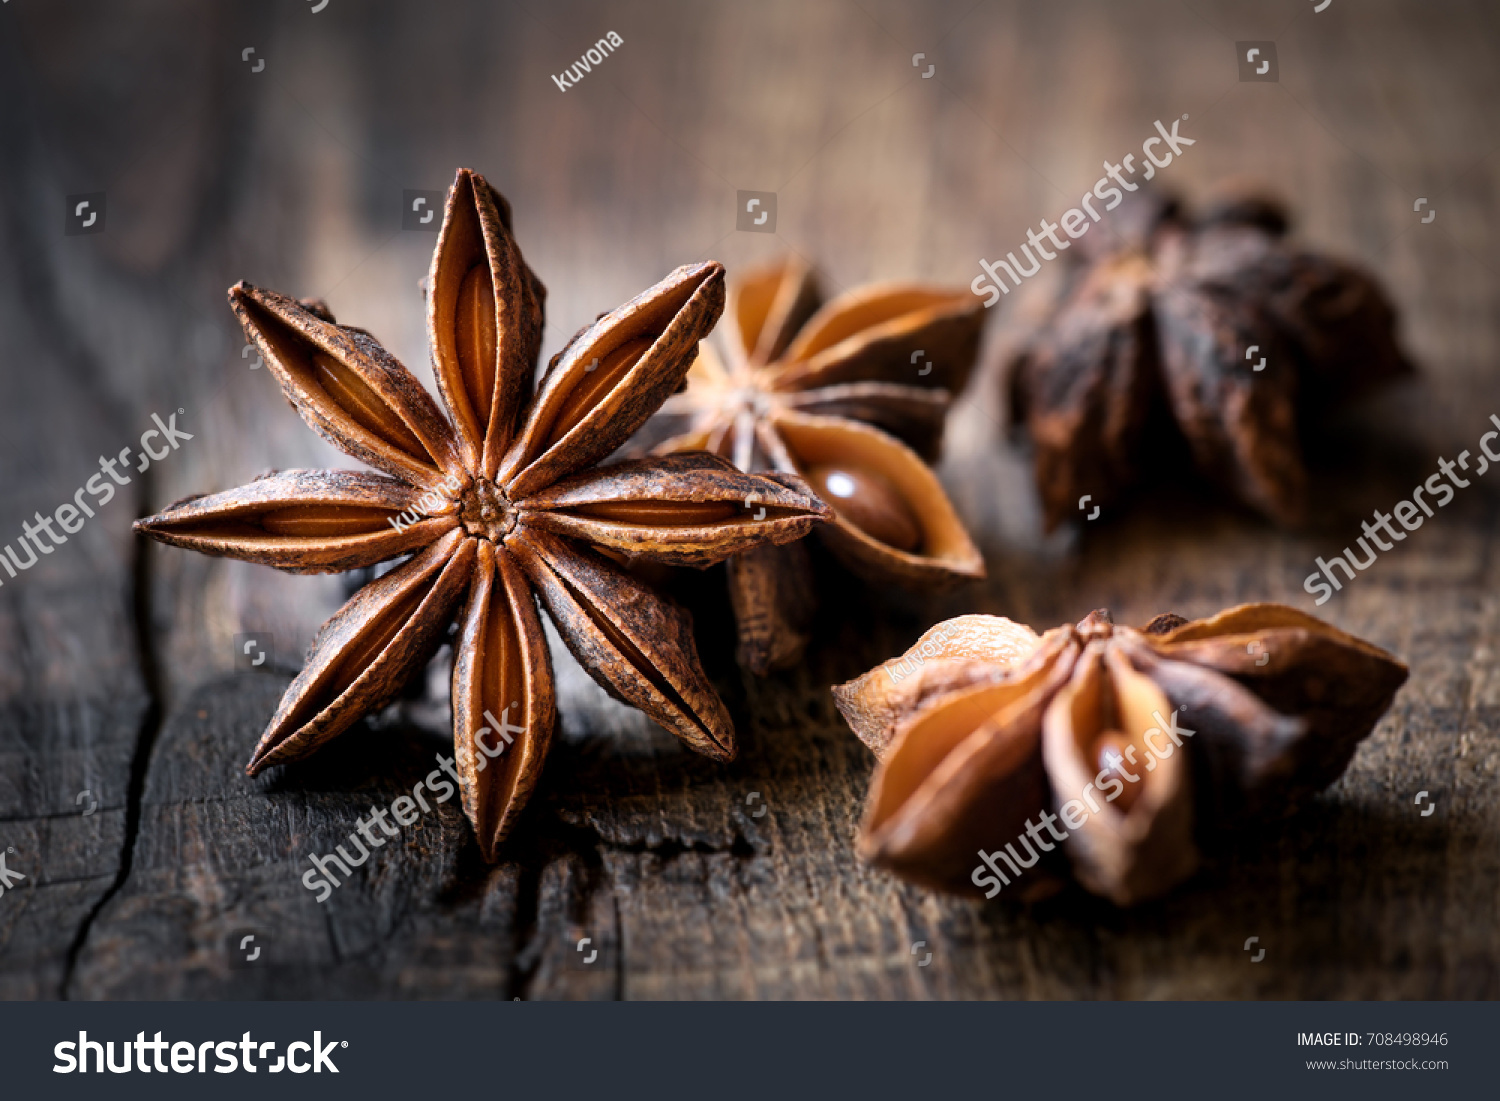 Anise stars closeup against dark rustic wooden background #708498946